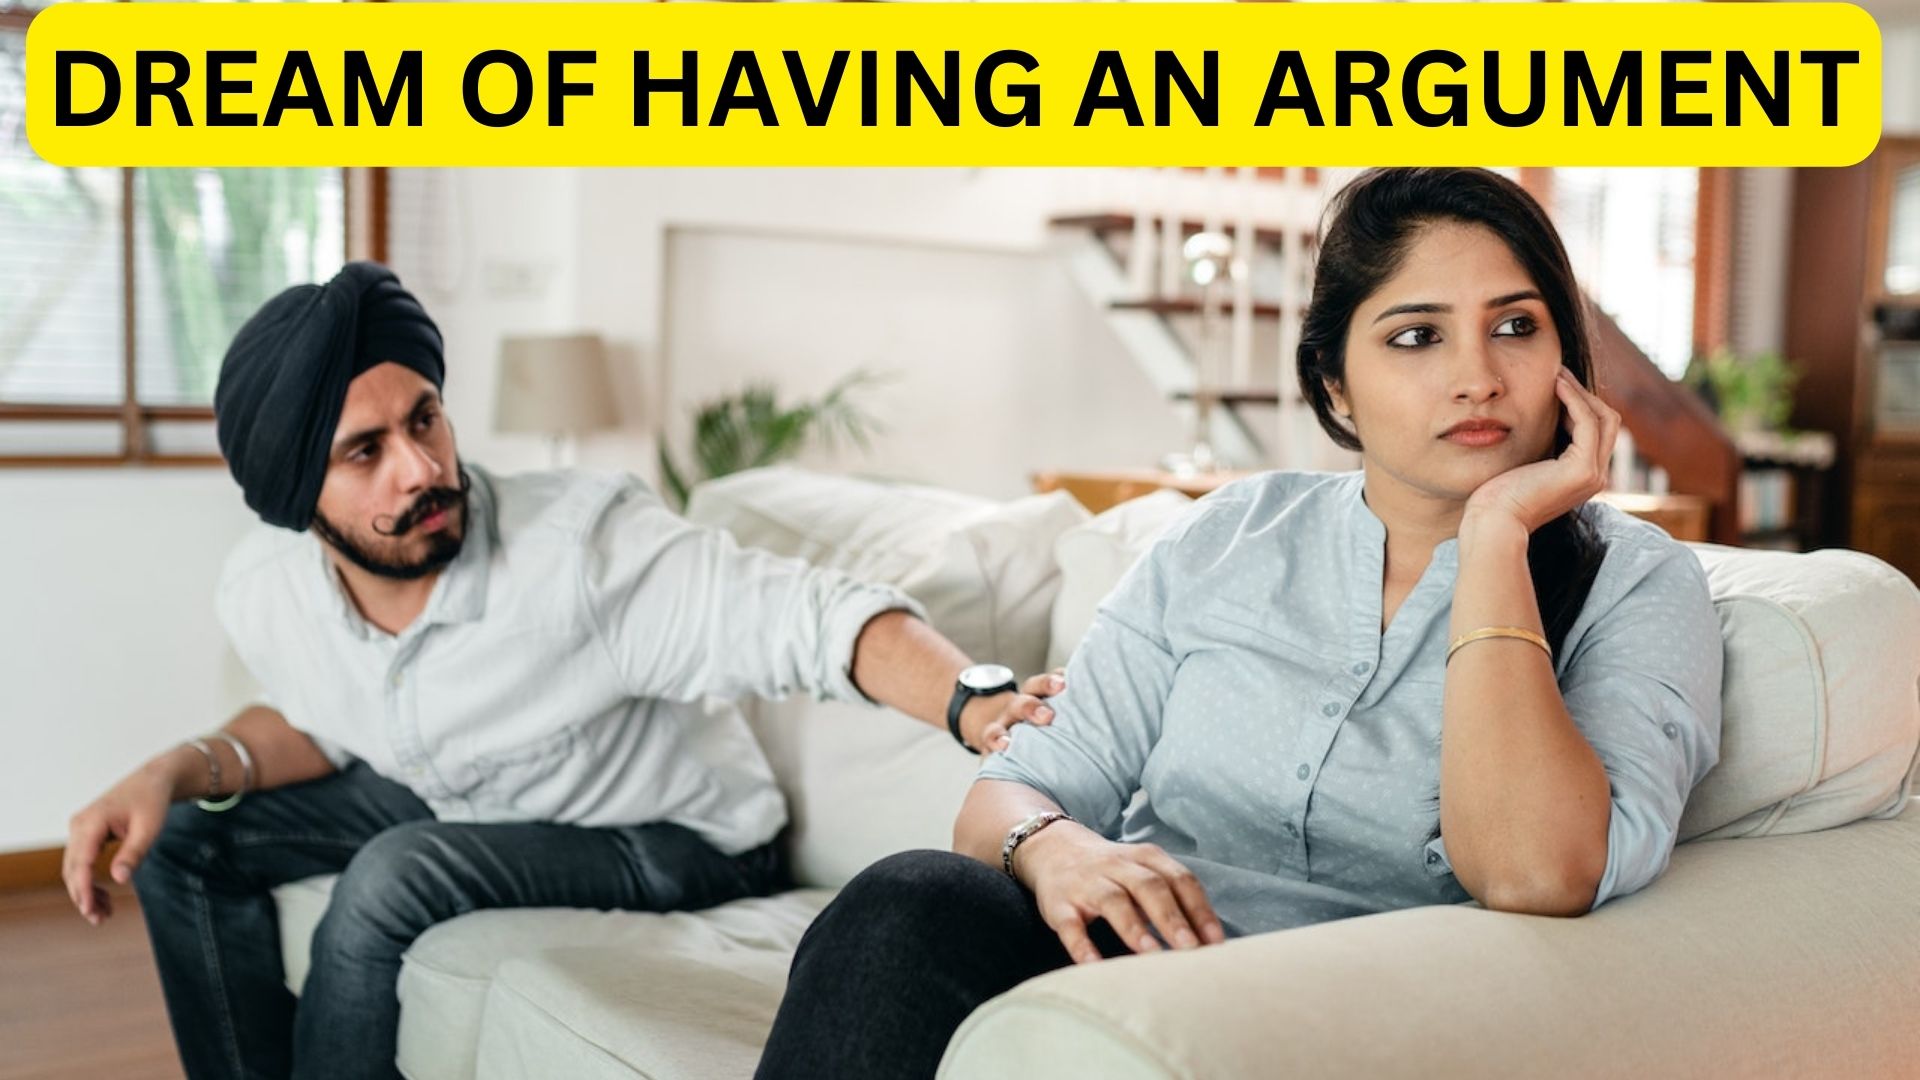 Dream Of Having An Argument - A Sign Of Unresolved Issues